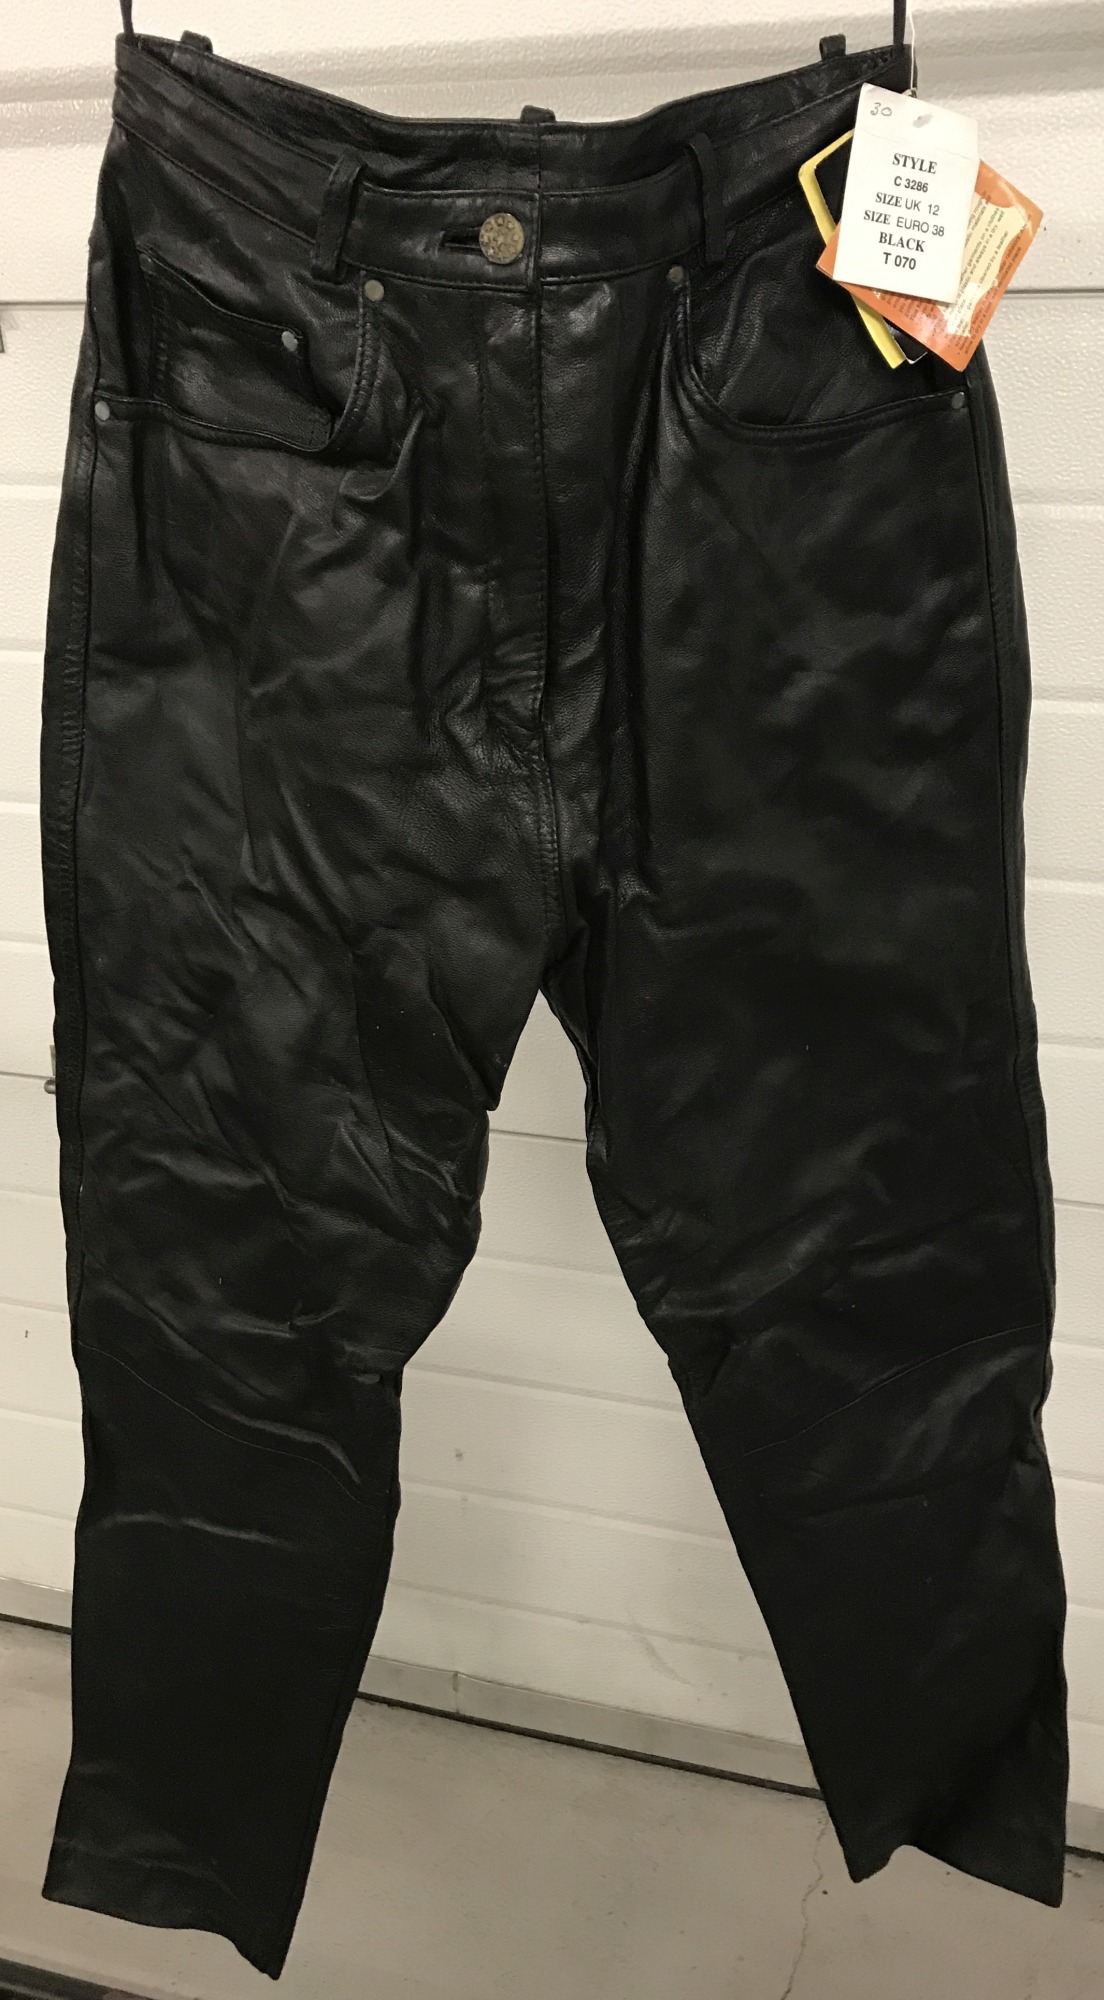 A pair of ladies "Modern Classics" black leather motor cycle trousers. With tags.